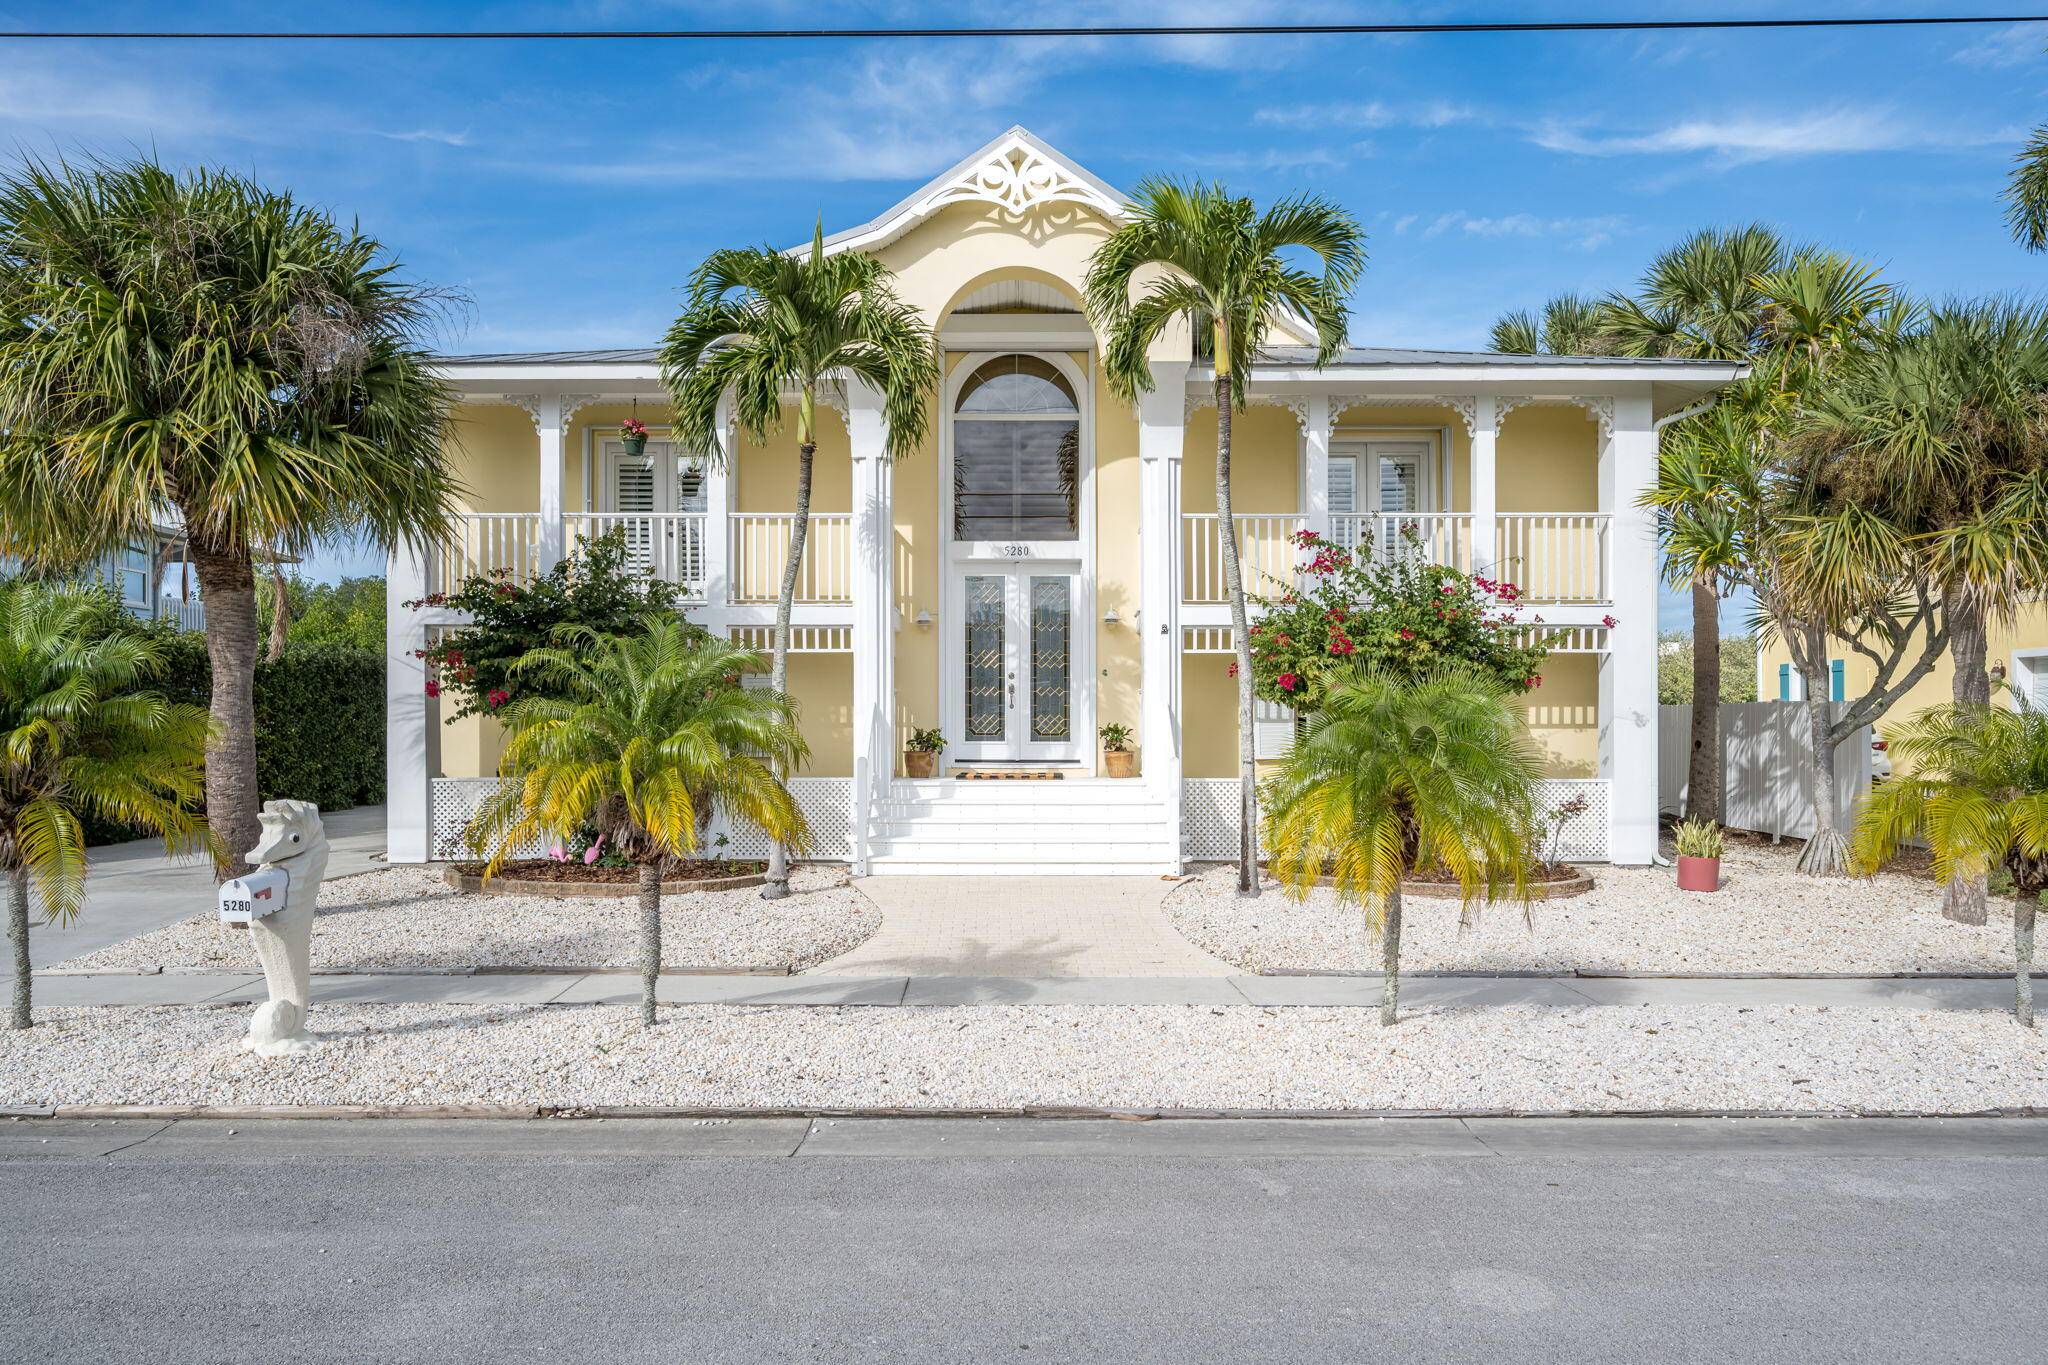 Postcard perfect views with this Key West style home, waterfront living home that is situated on a private canal w an additional boat dock !